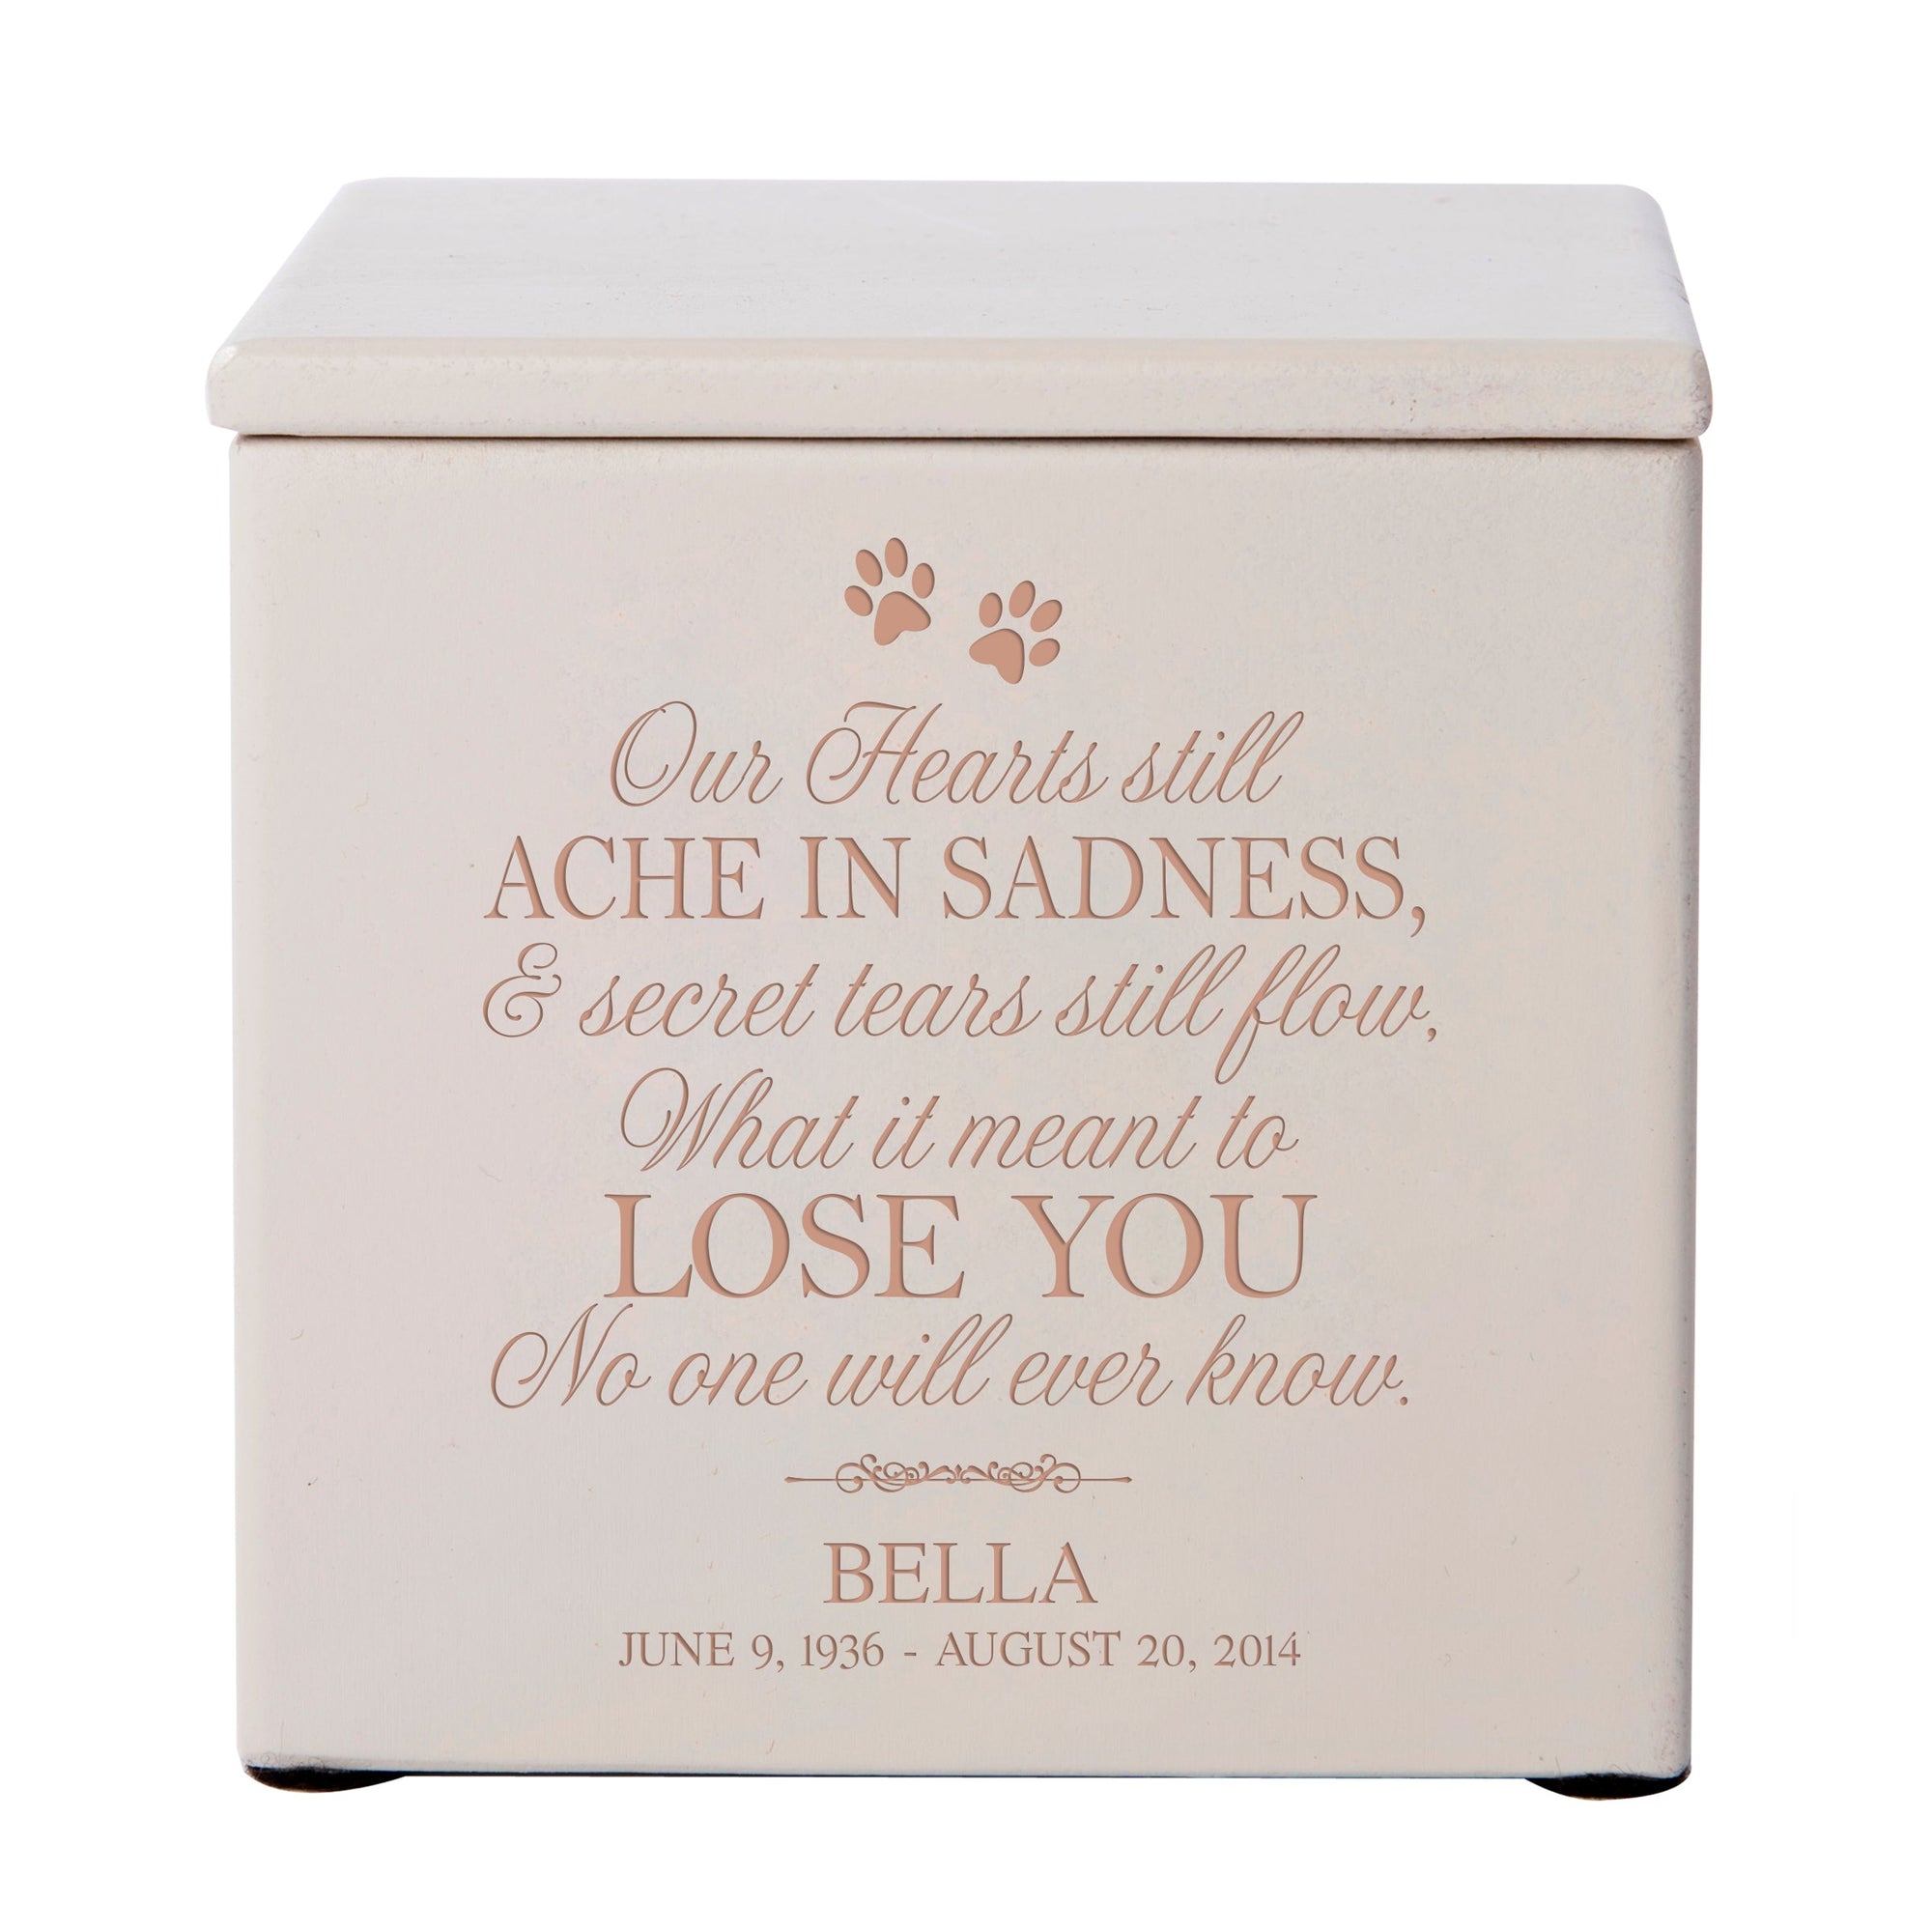 Pet Memorial Keepsake Cremation Urn Box for Dog or Cat - Our Hearts Still Ache In Sadness